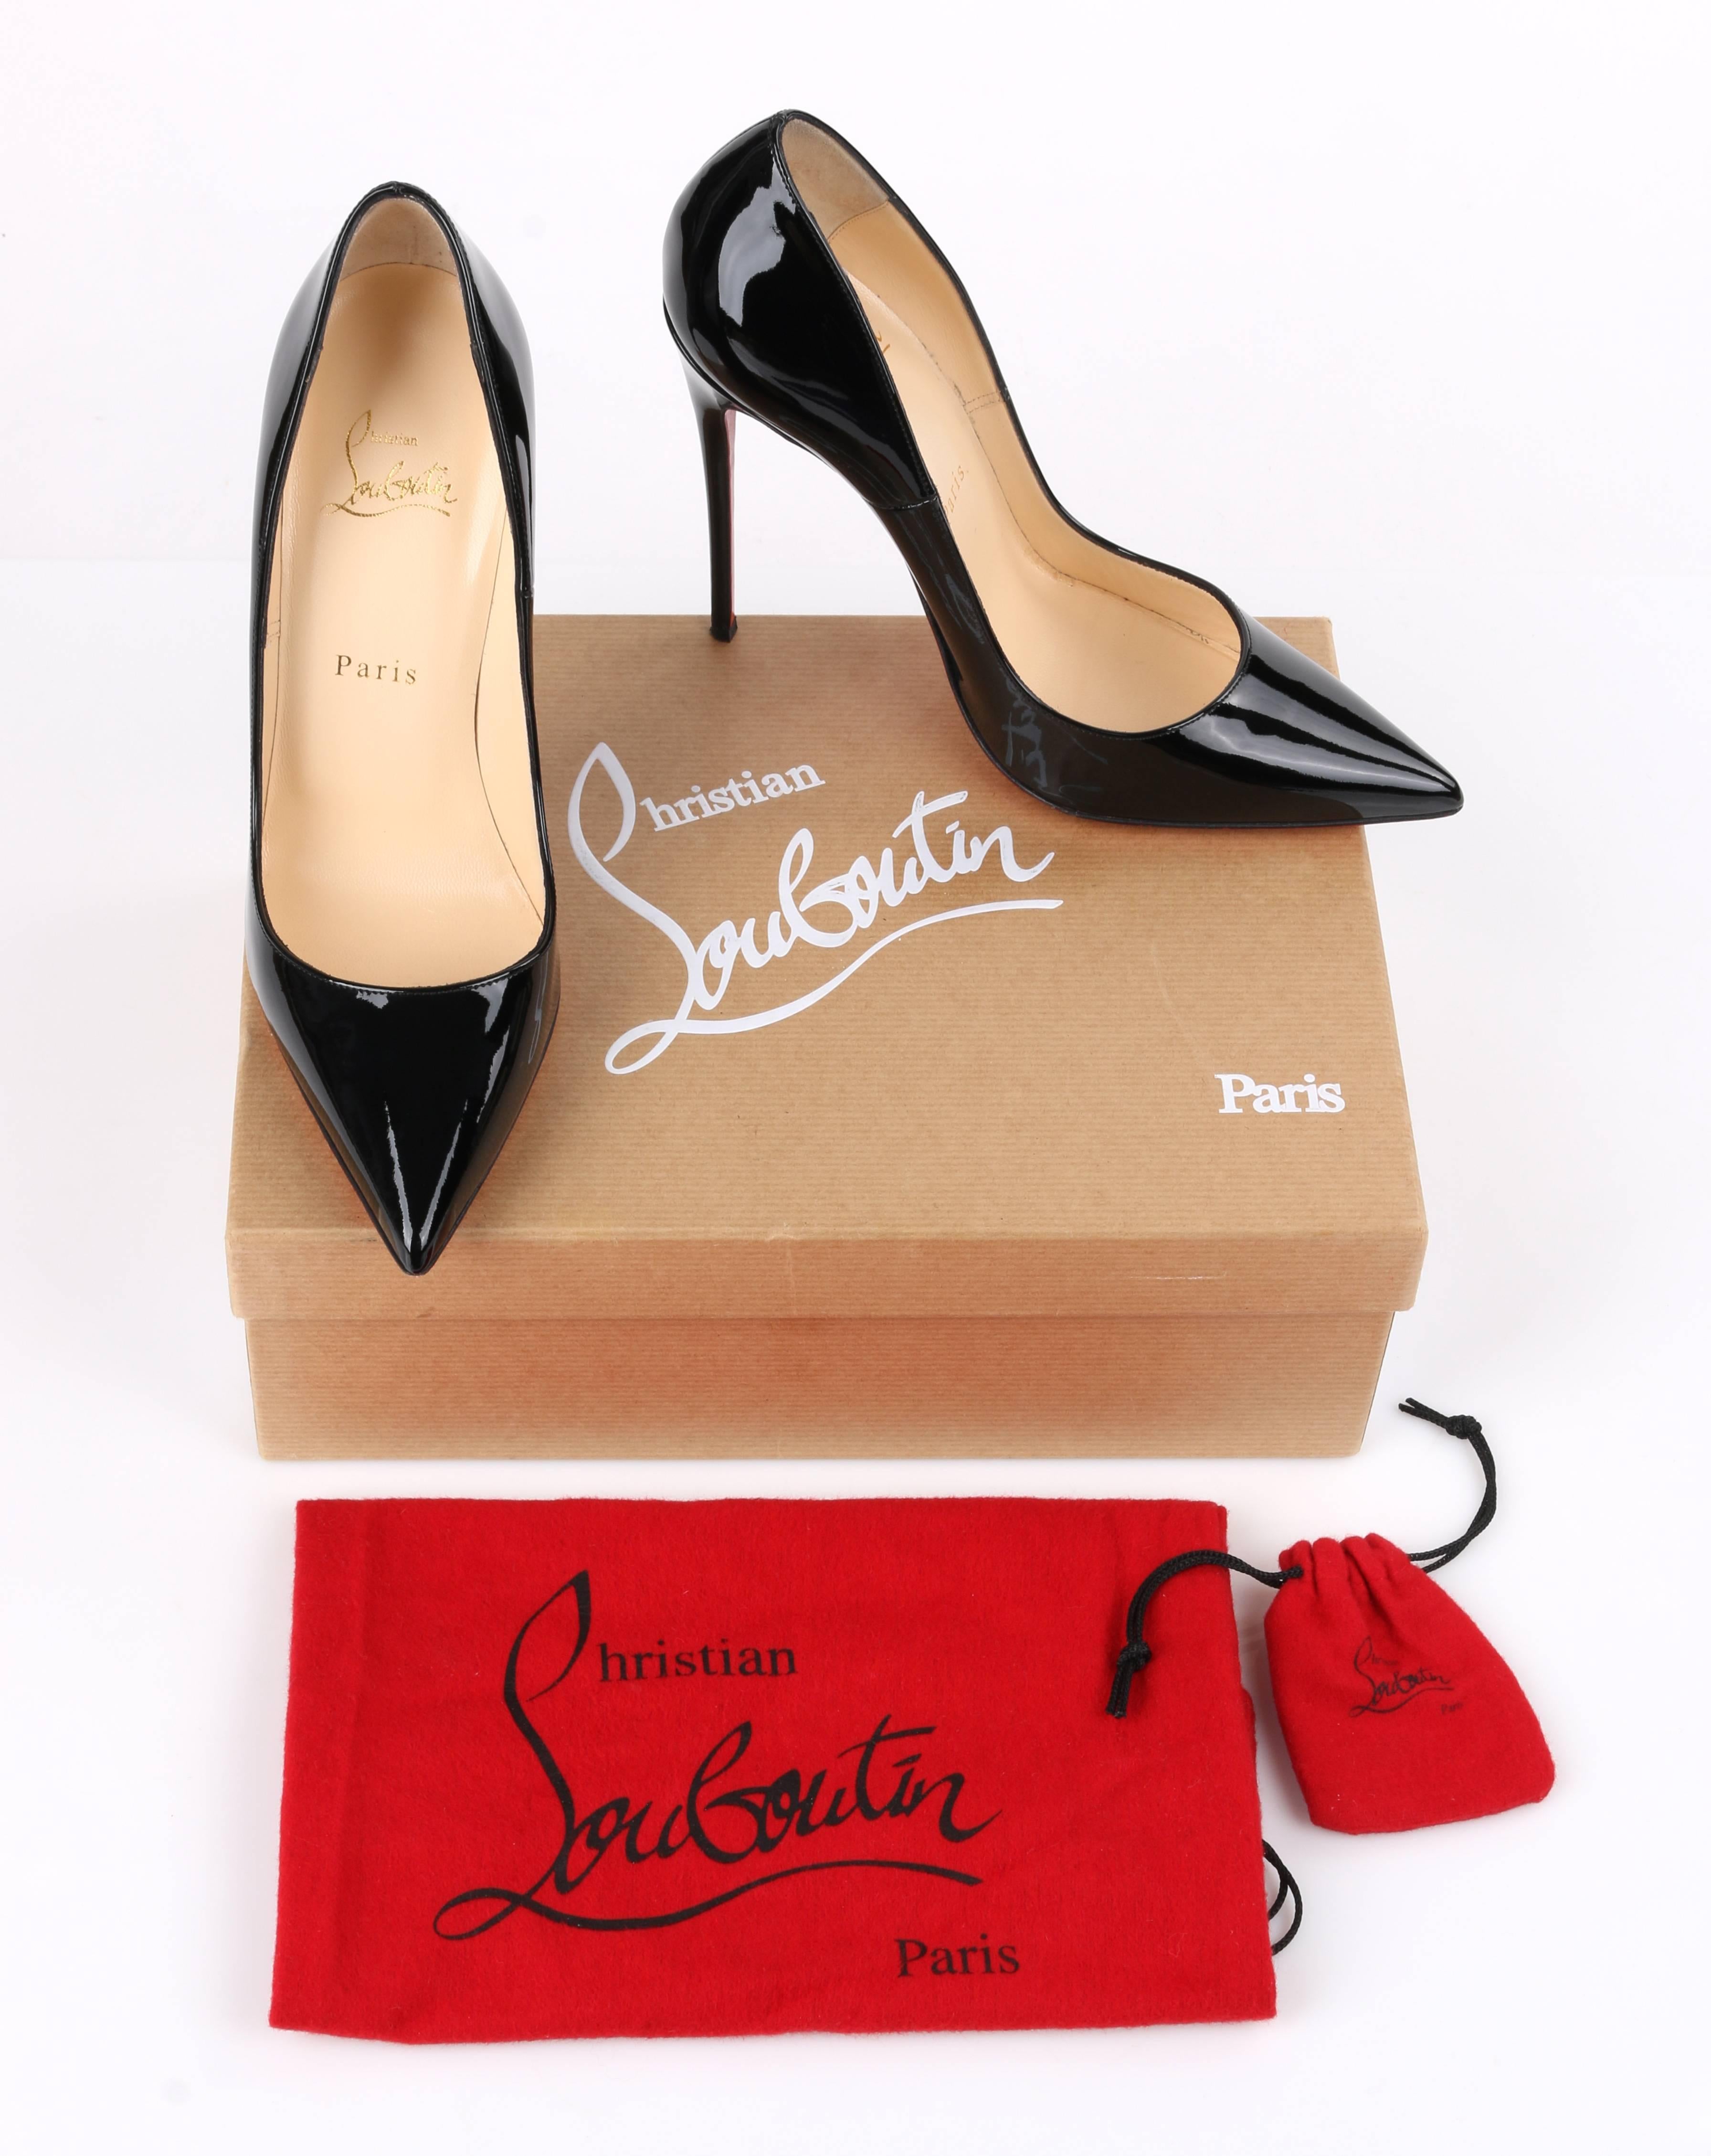 Christian Louboutin "So Kate" 120 mm black patent leather pointed toe pumps. Black patent leather upper. 120 mm patent leather covered stiletto heel. Pointed toe. Leather lining. Signature red leather sole. MSRP $675. Original box, dust